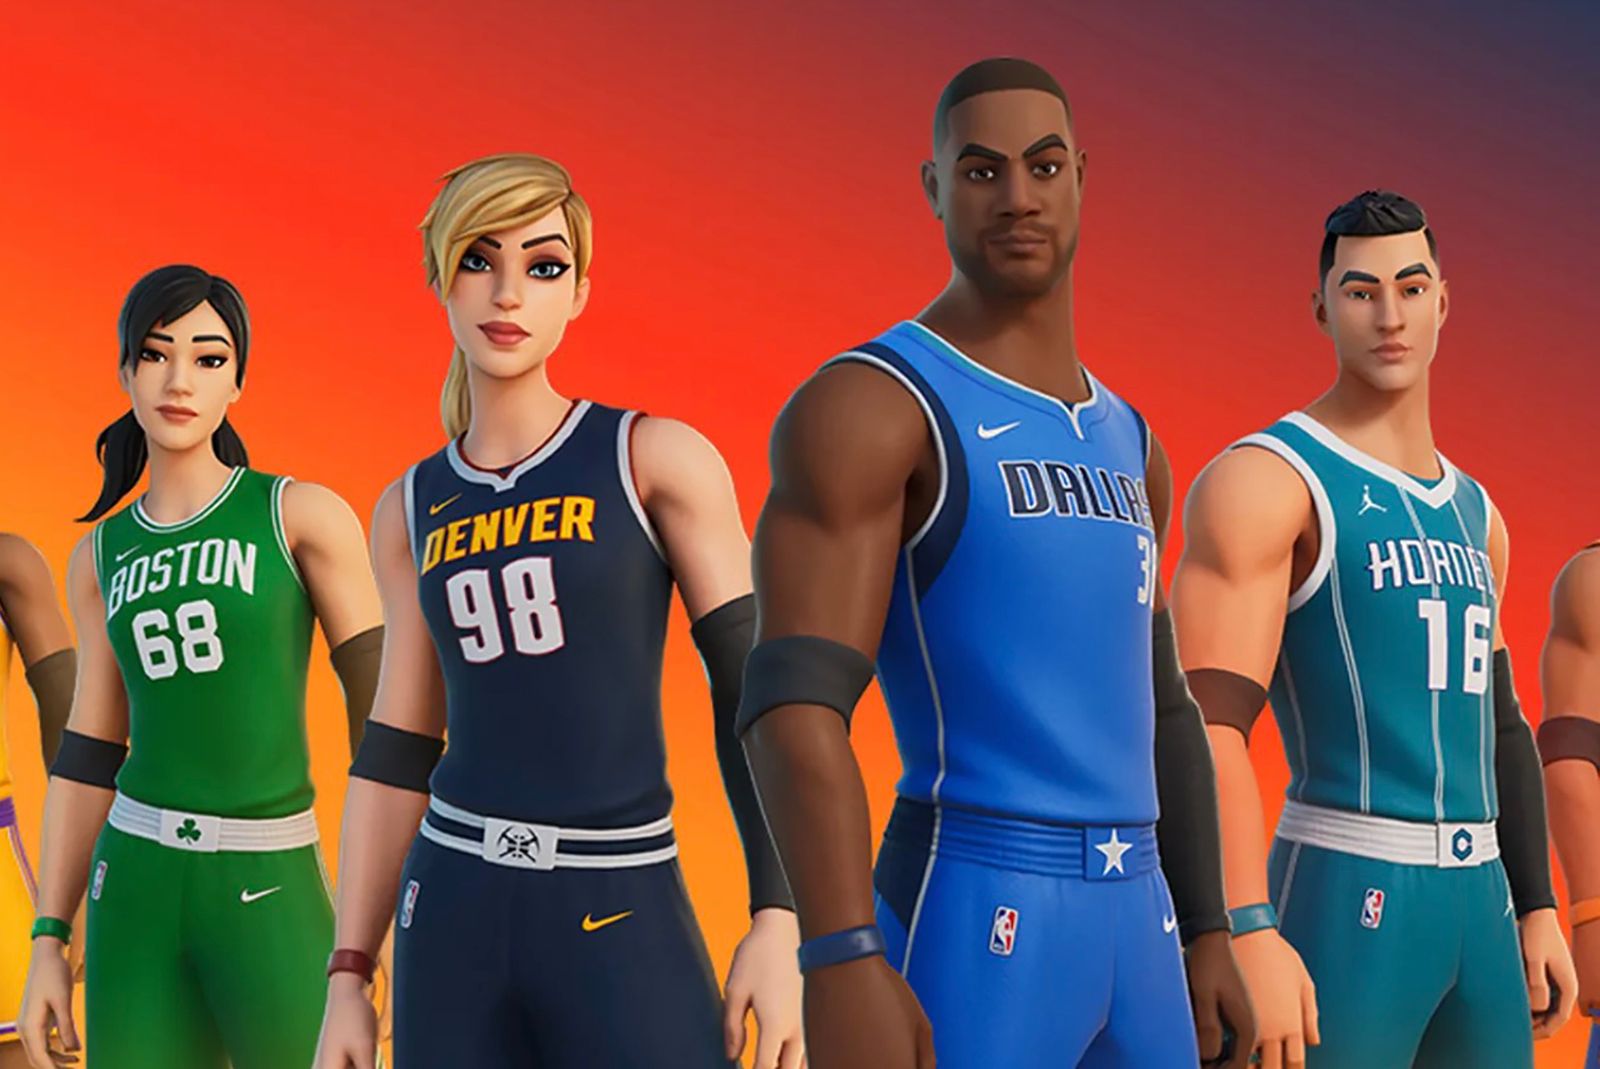 Official NBA jerseys are coming to Fortnite this week photo 1